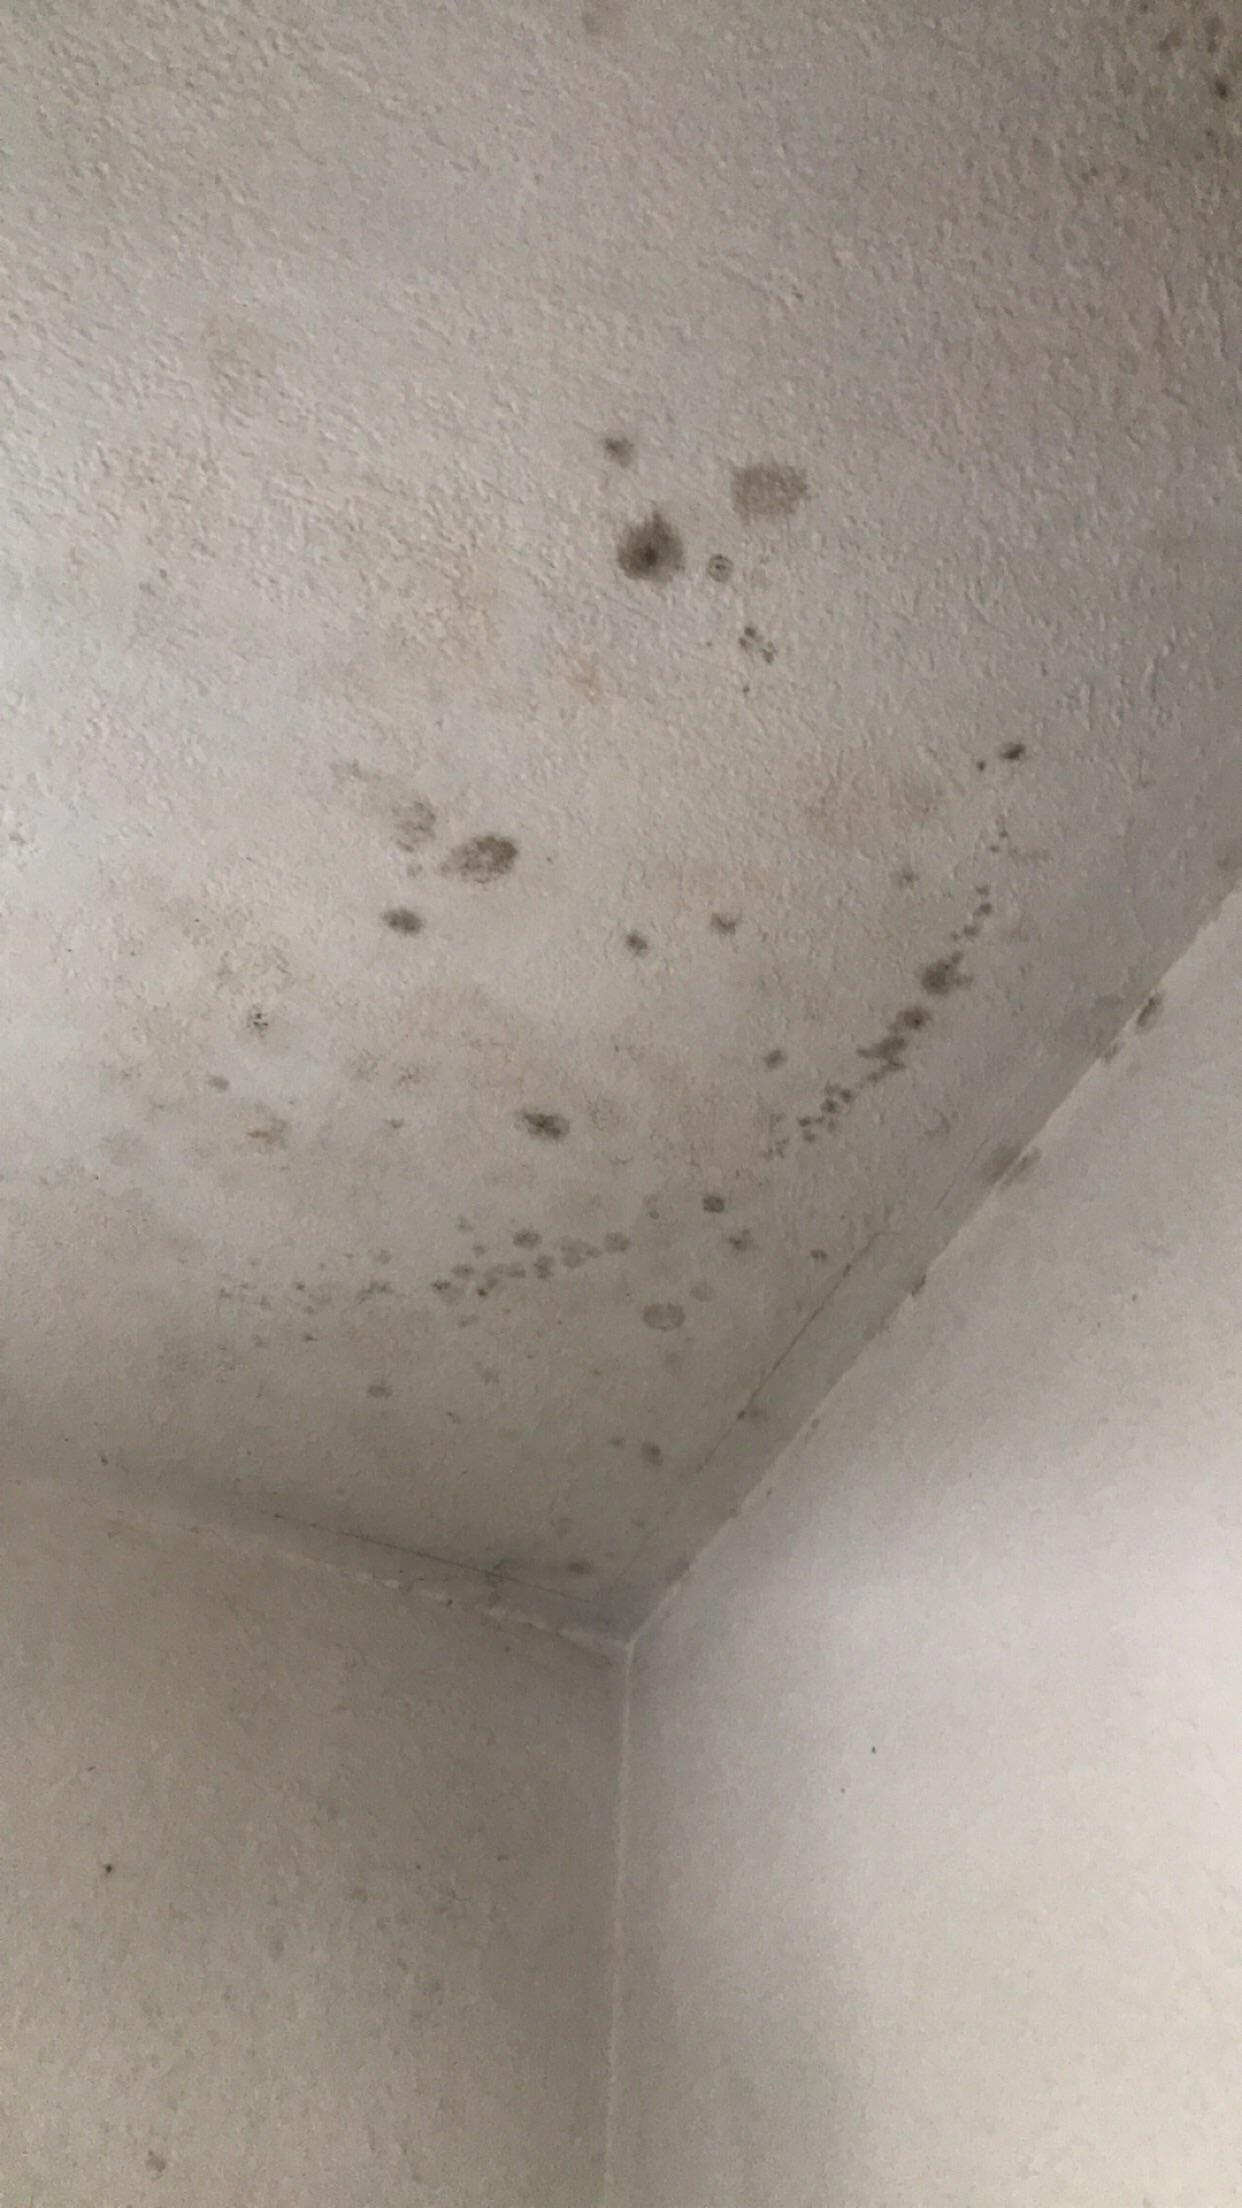 How To Get Rid Of Mold Spots On Bathroom Ceiling